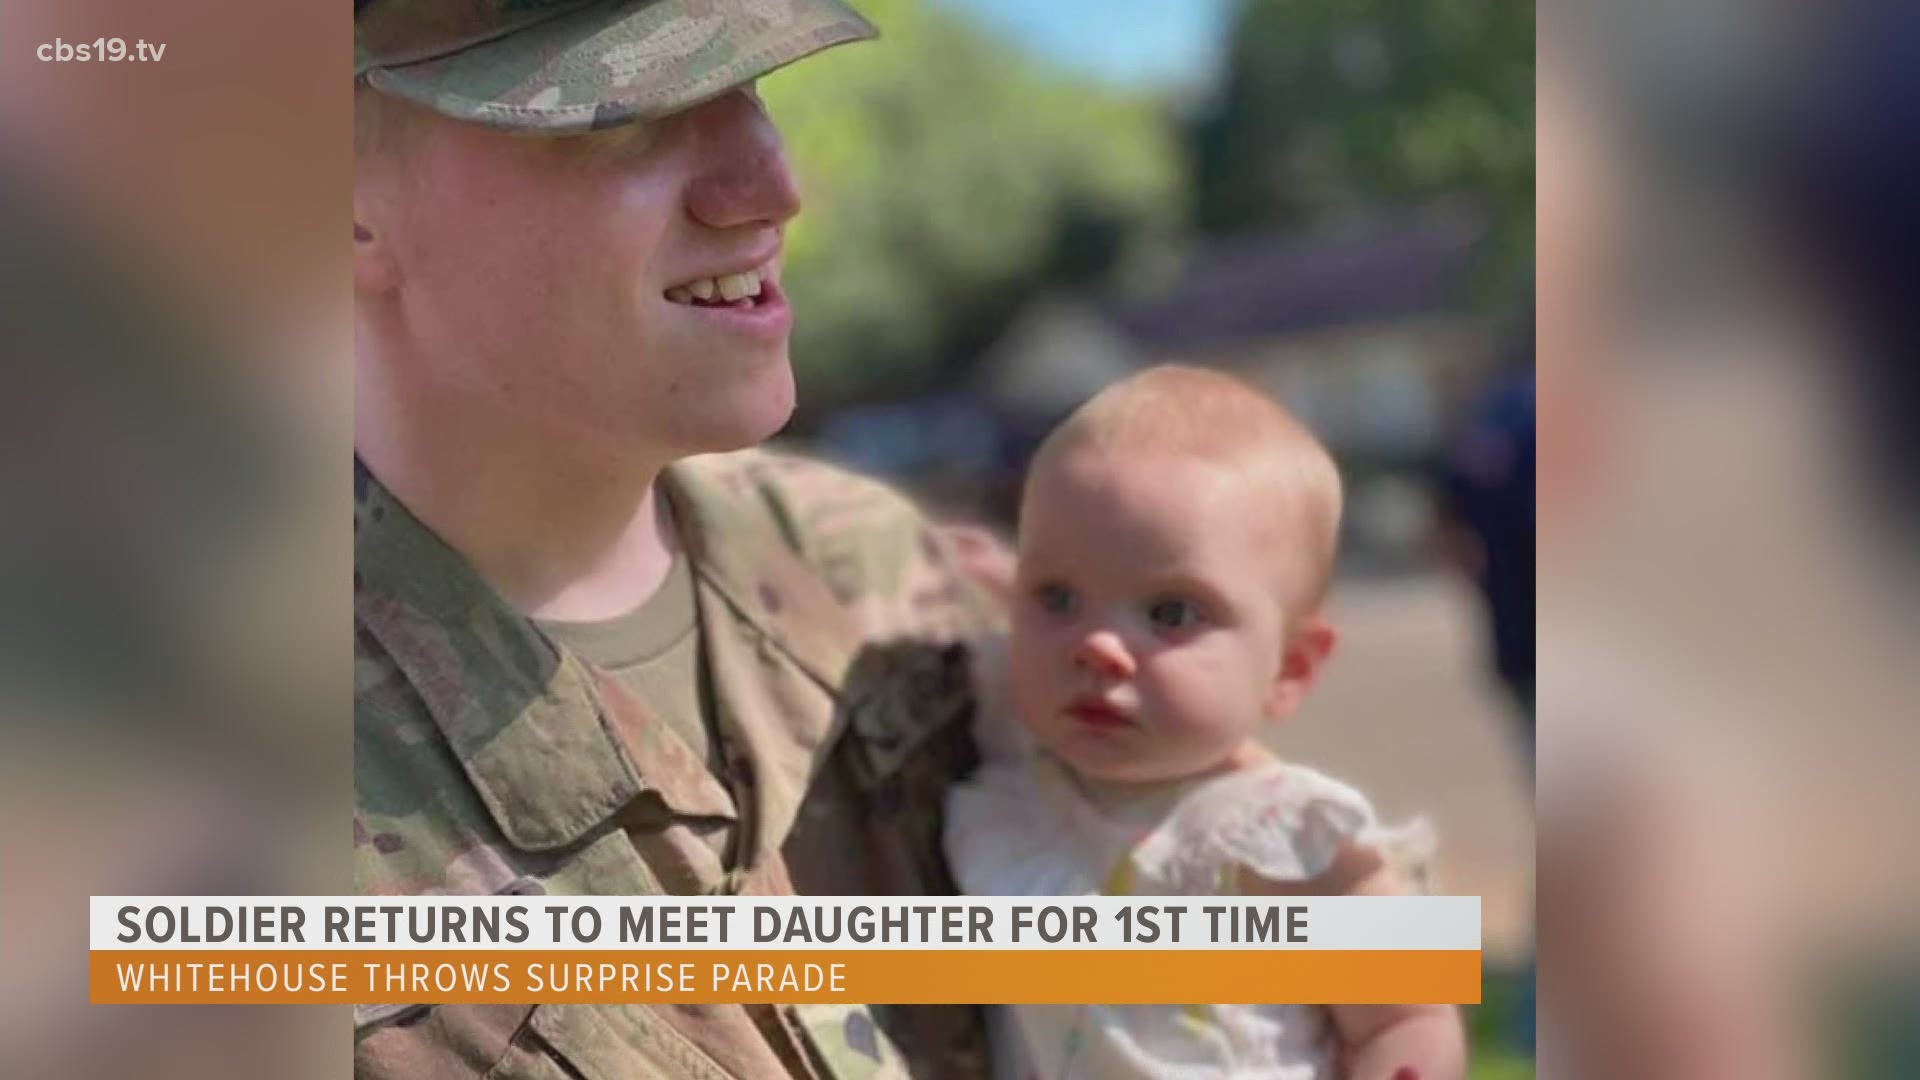 After spending more than nine months serving in Kuwait, Cody Reel returned home to meet his daughter for the first time.